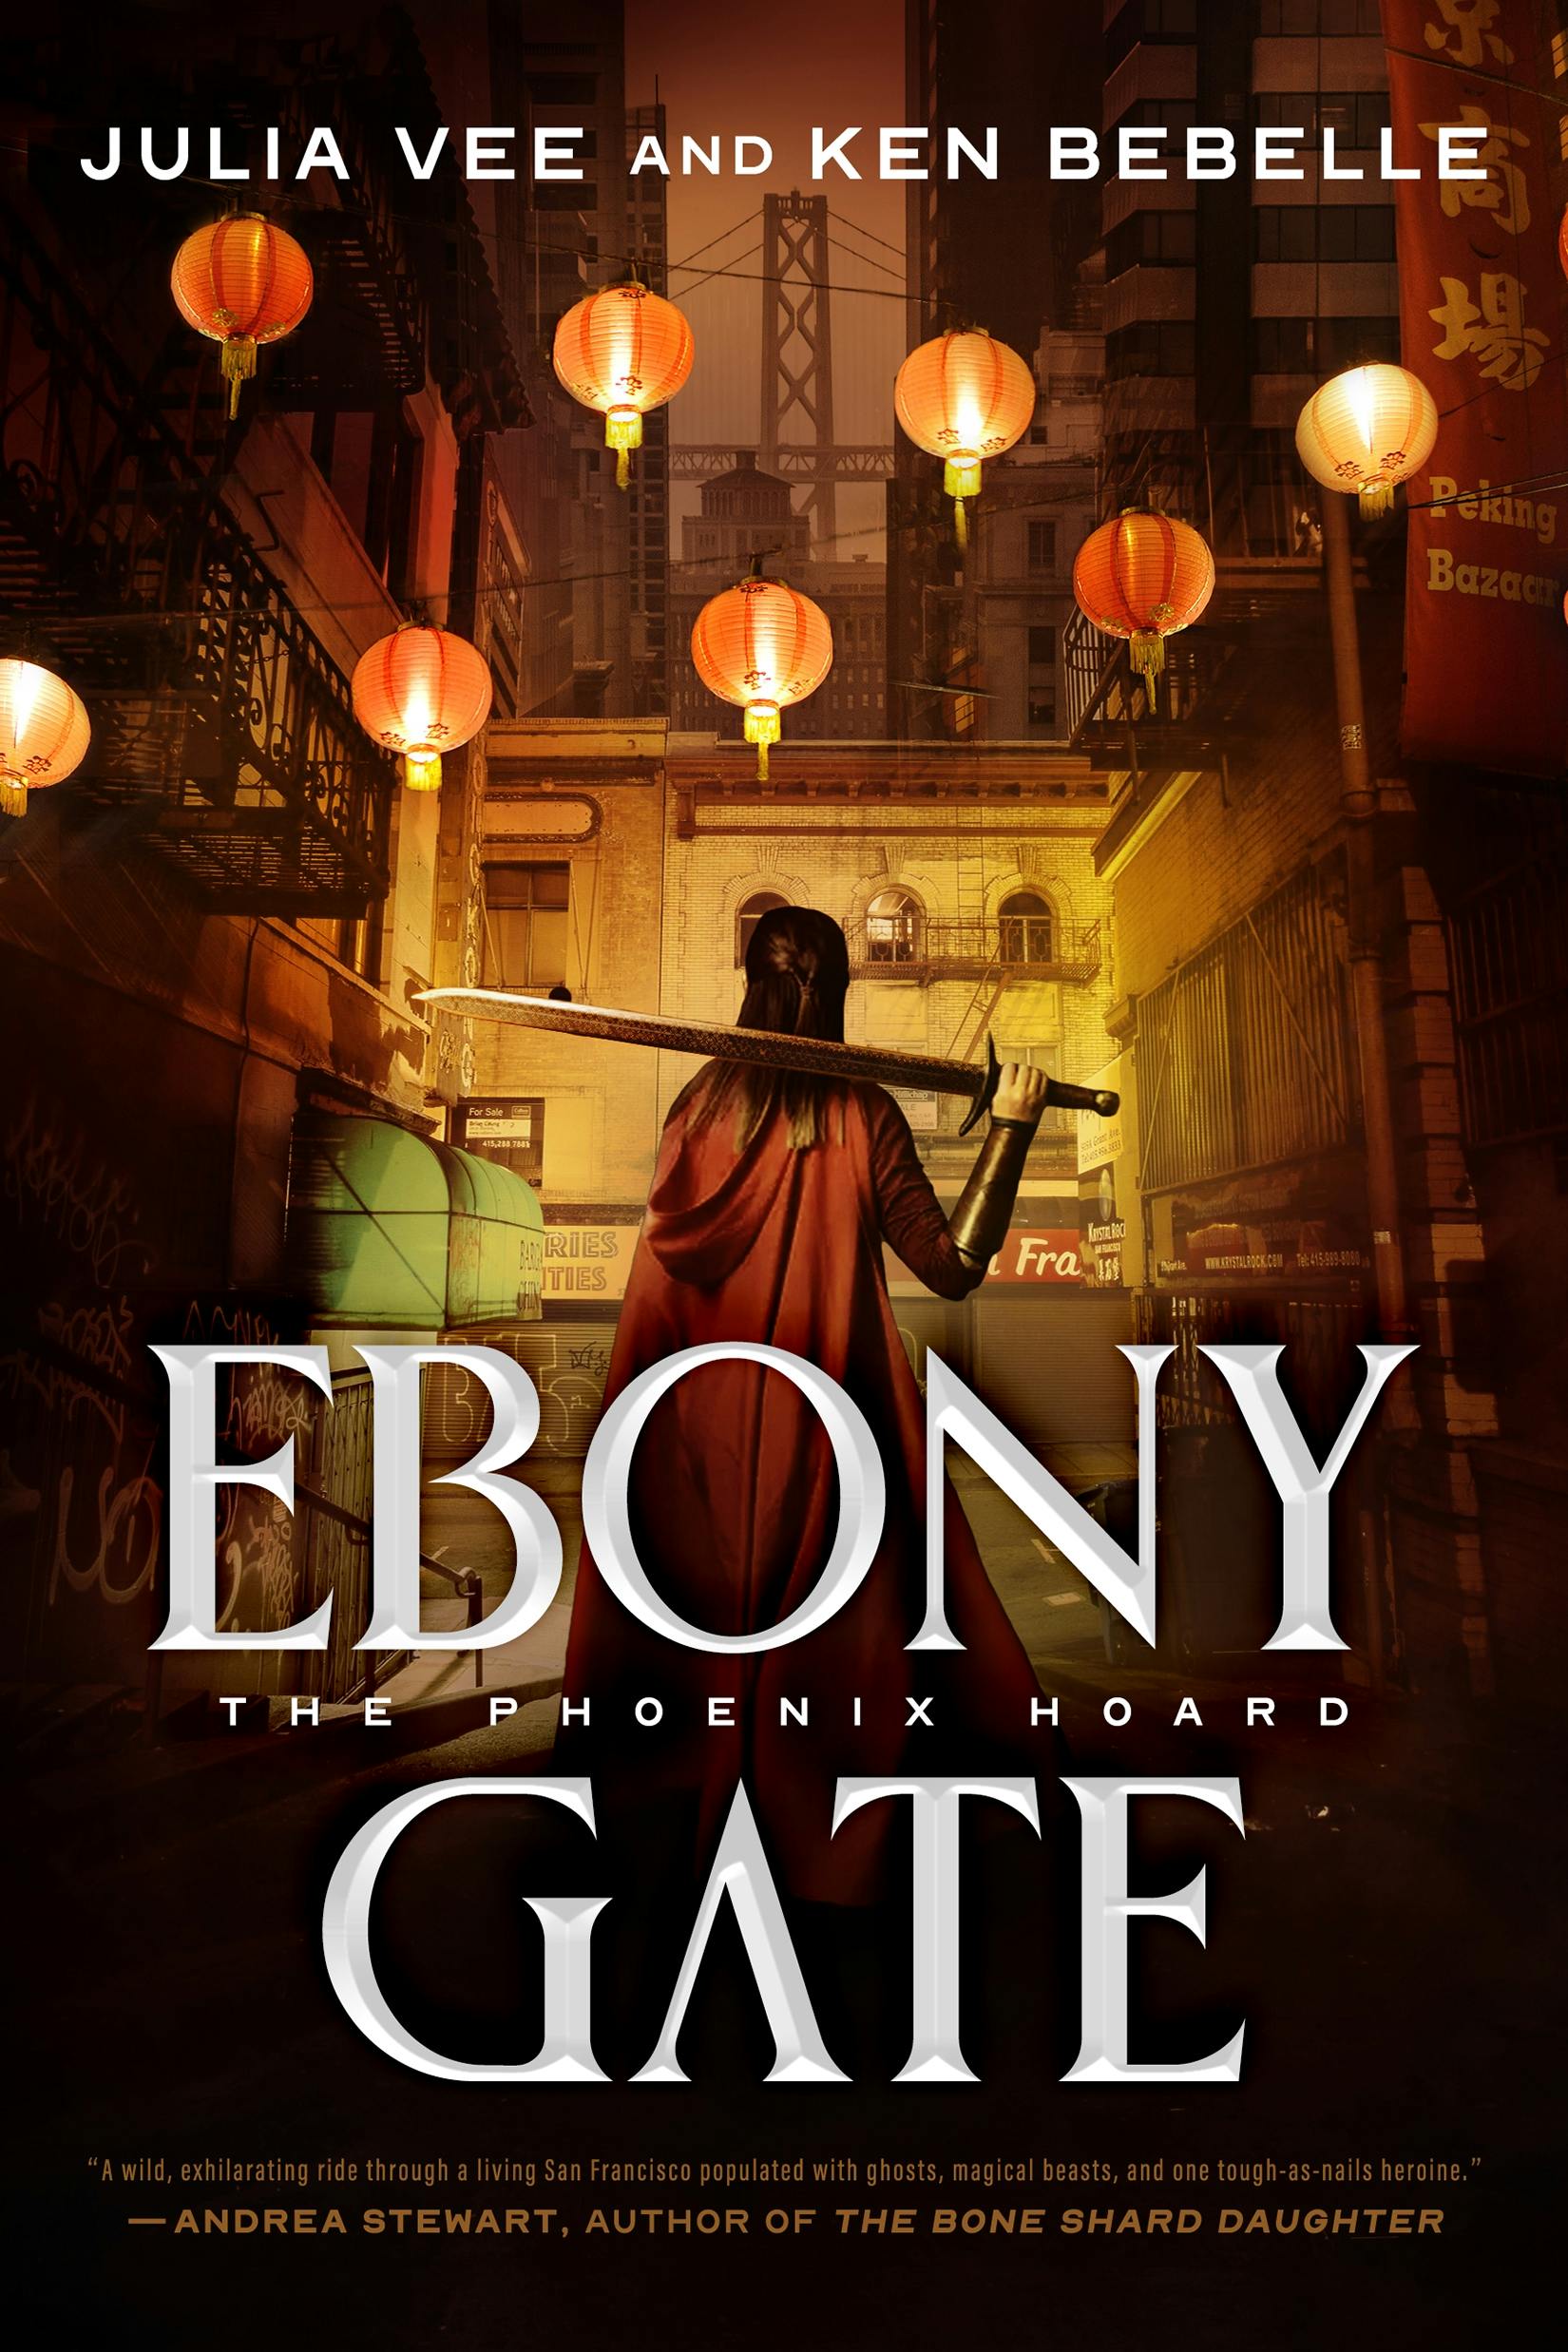 Cover for the book titled as: Ebony Gate